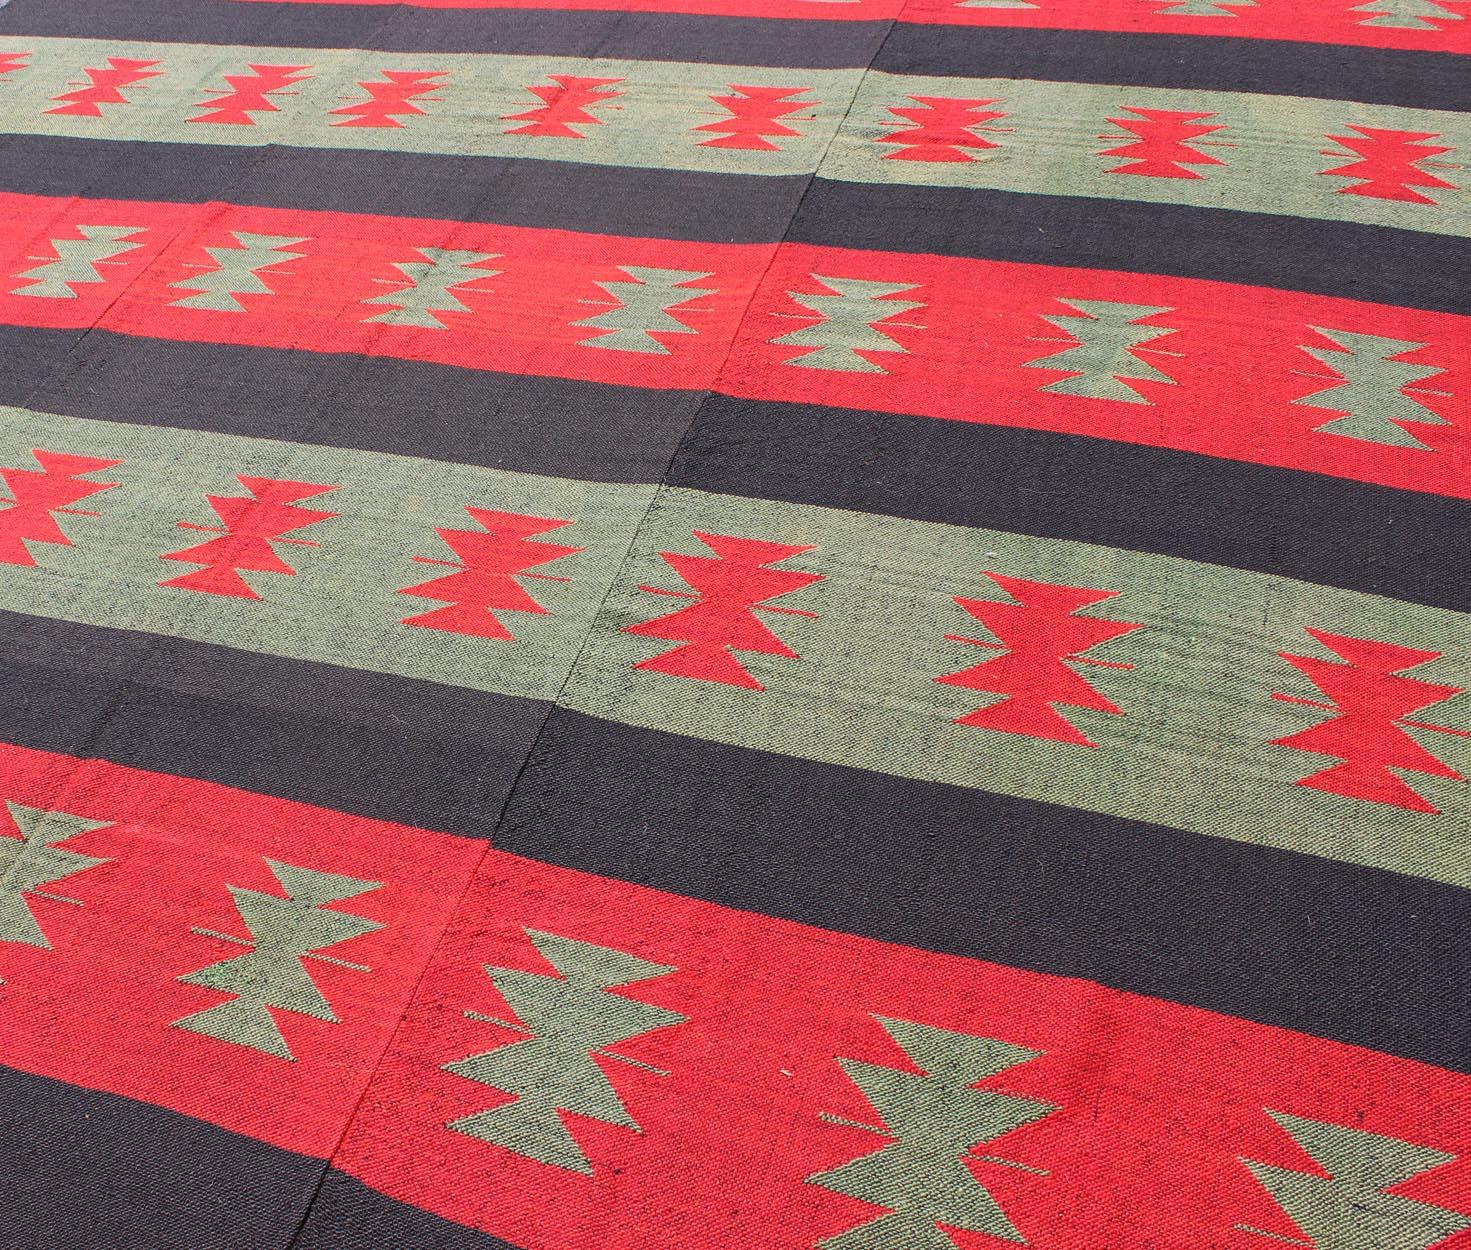 20th Century Large Vintage Kilim Rug with Tribal Shapes and Stripes in Red, Brown and Green For Sale